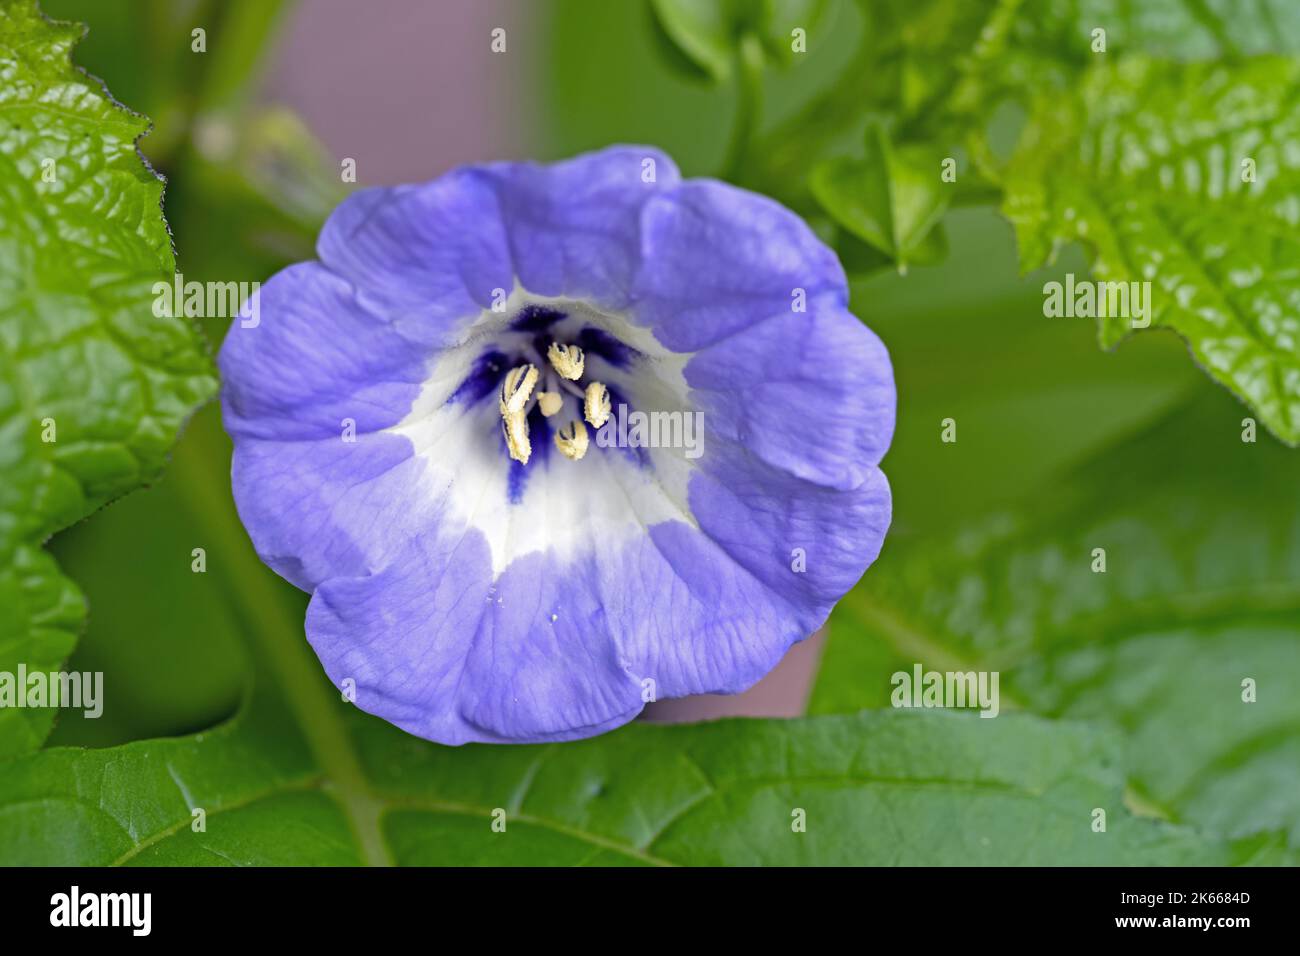 Close-up of blue flower of shoo-fly plant, Nicandra physalodes Stock Photo